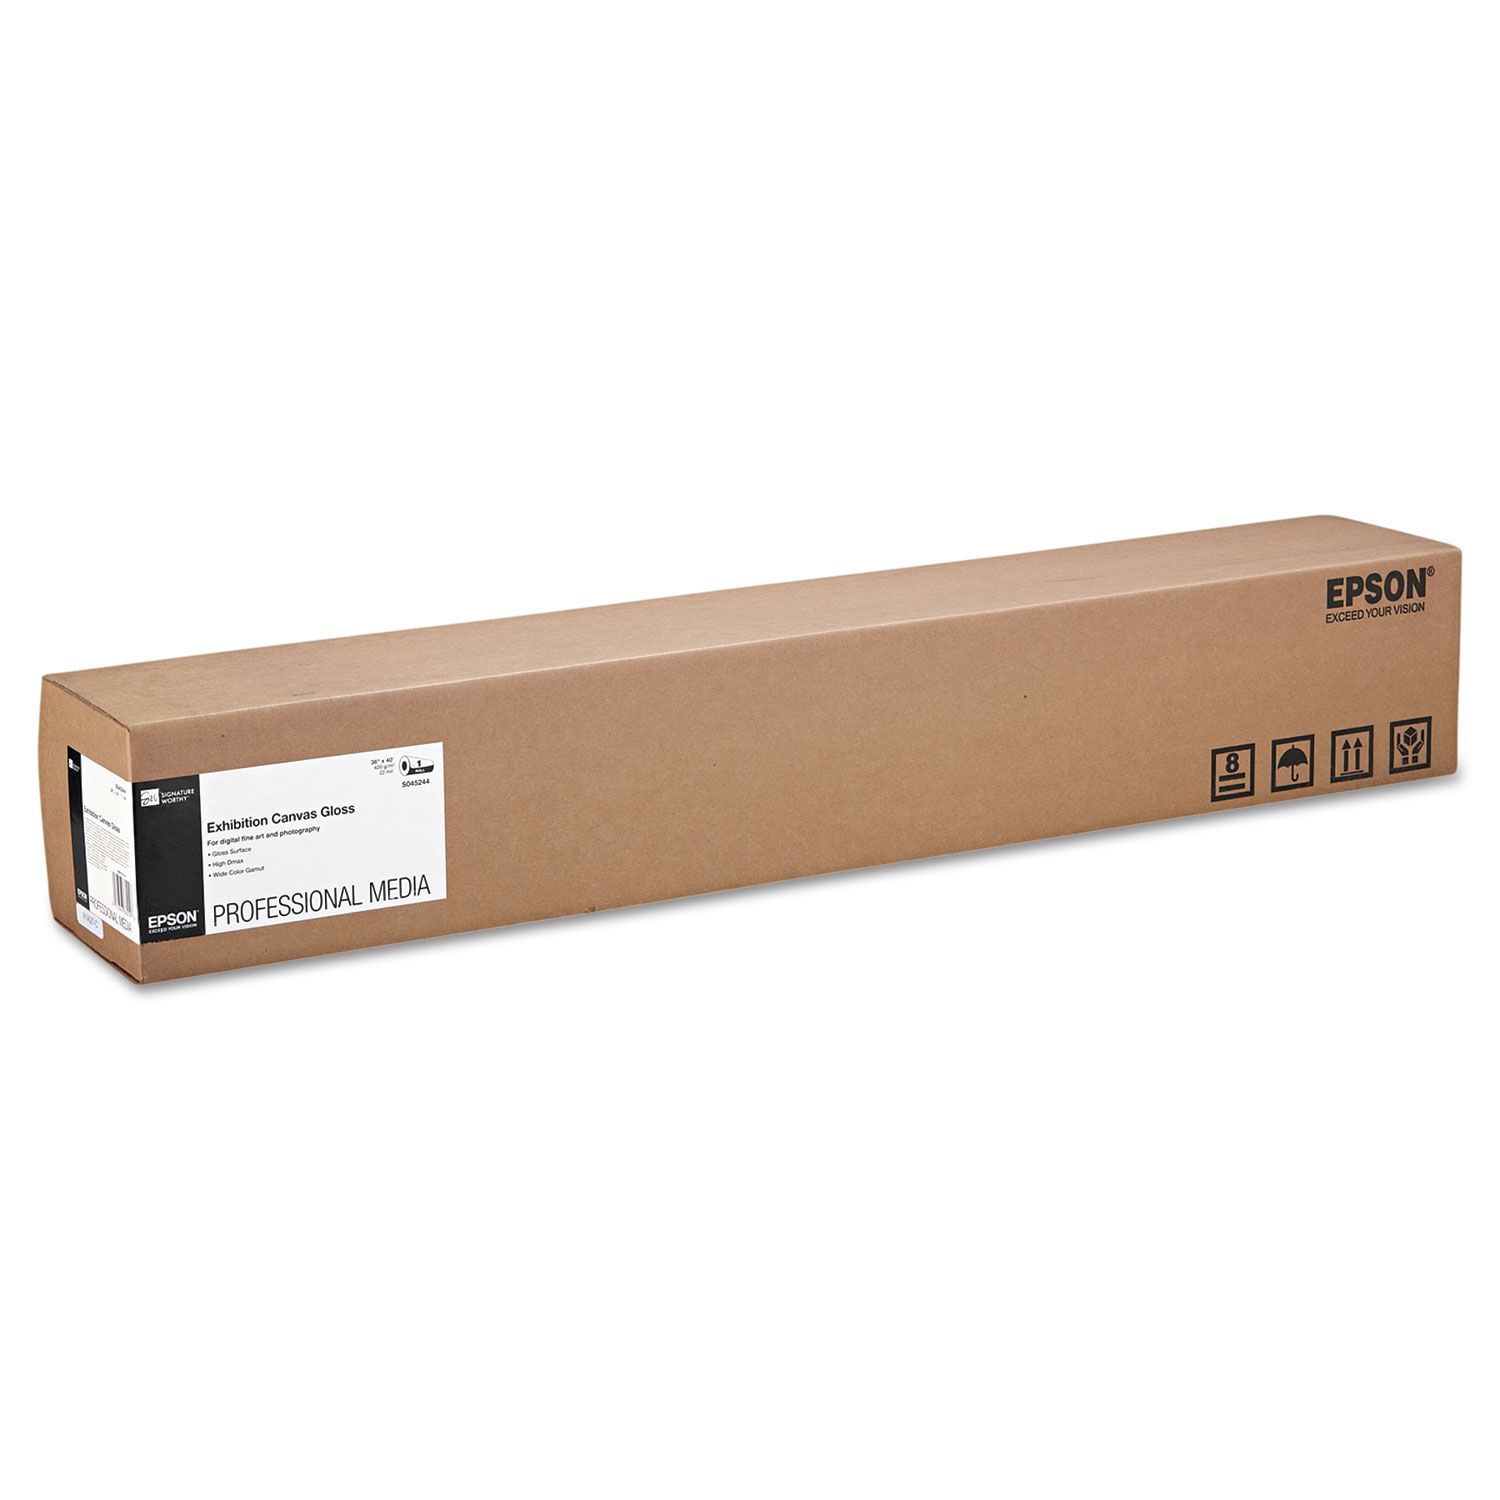  Epson S045244 Exhibition Canvas, 22 mil, 36 x 40 ft, Glossy White (EPSS045244) 